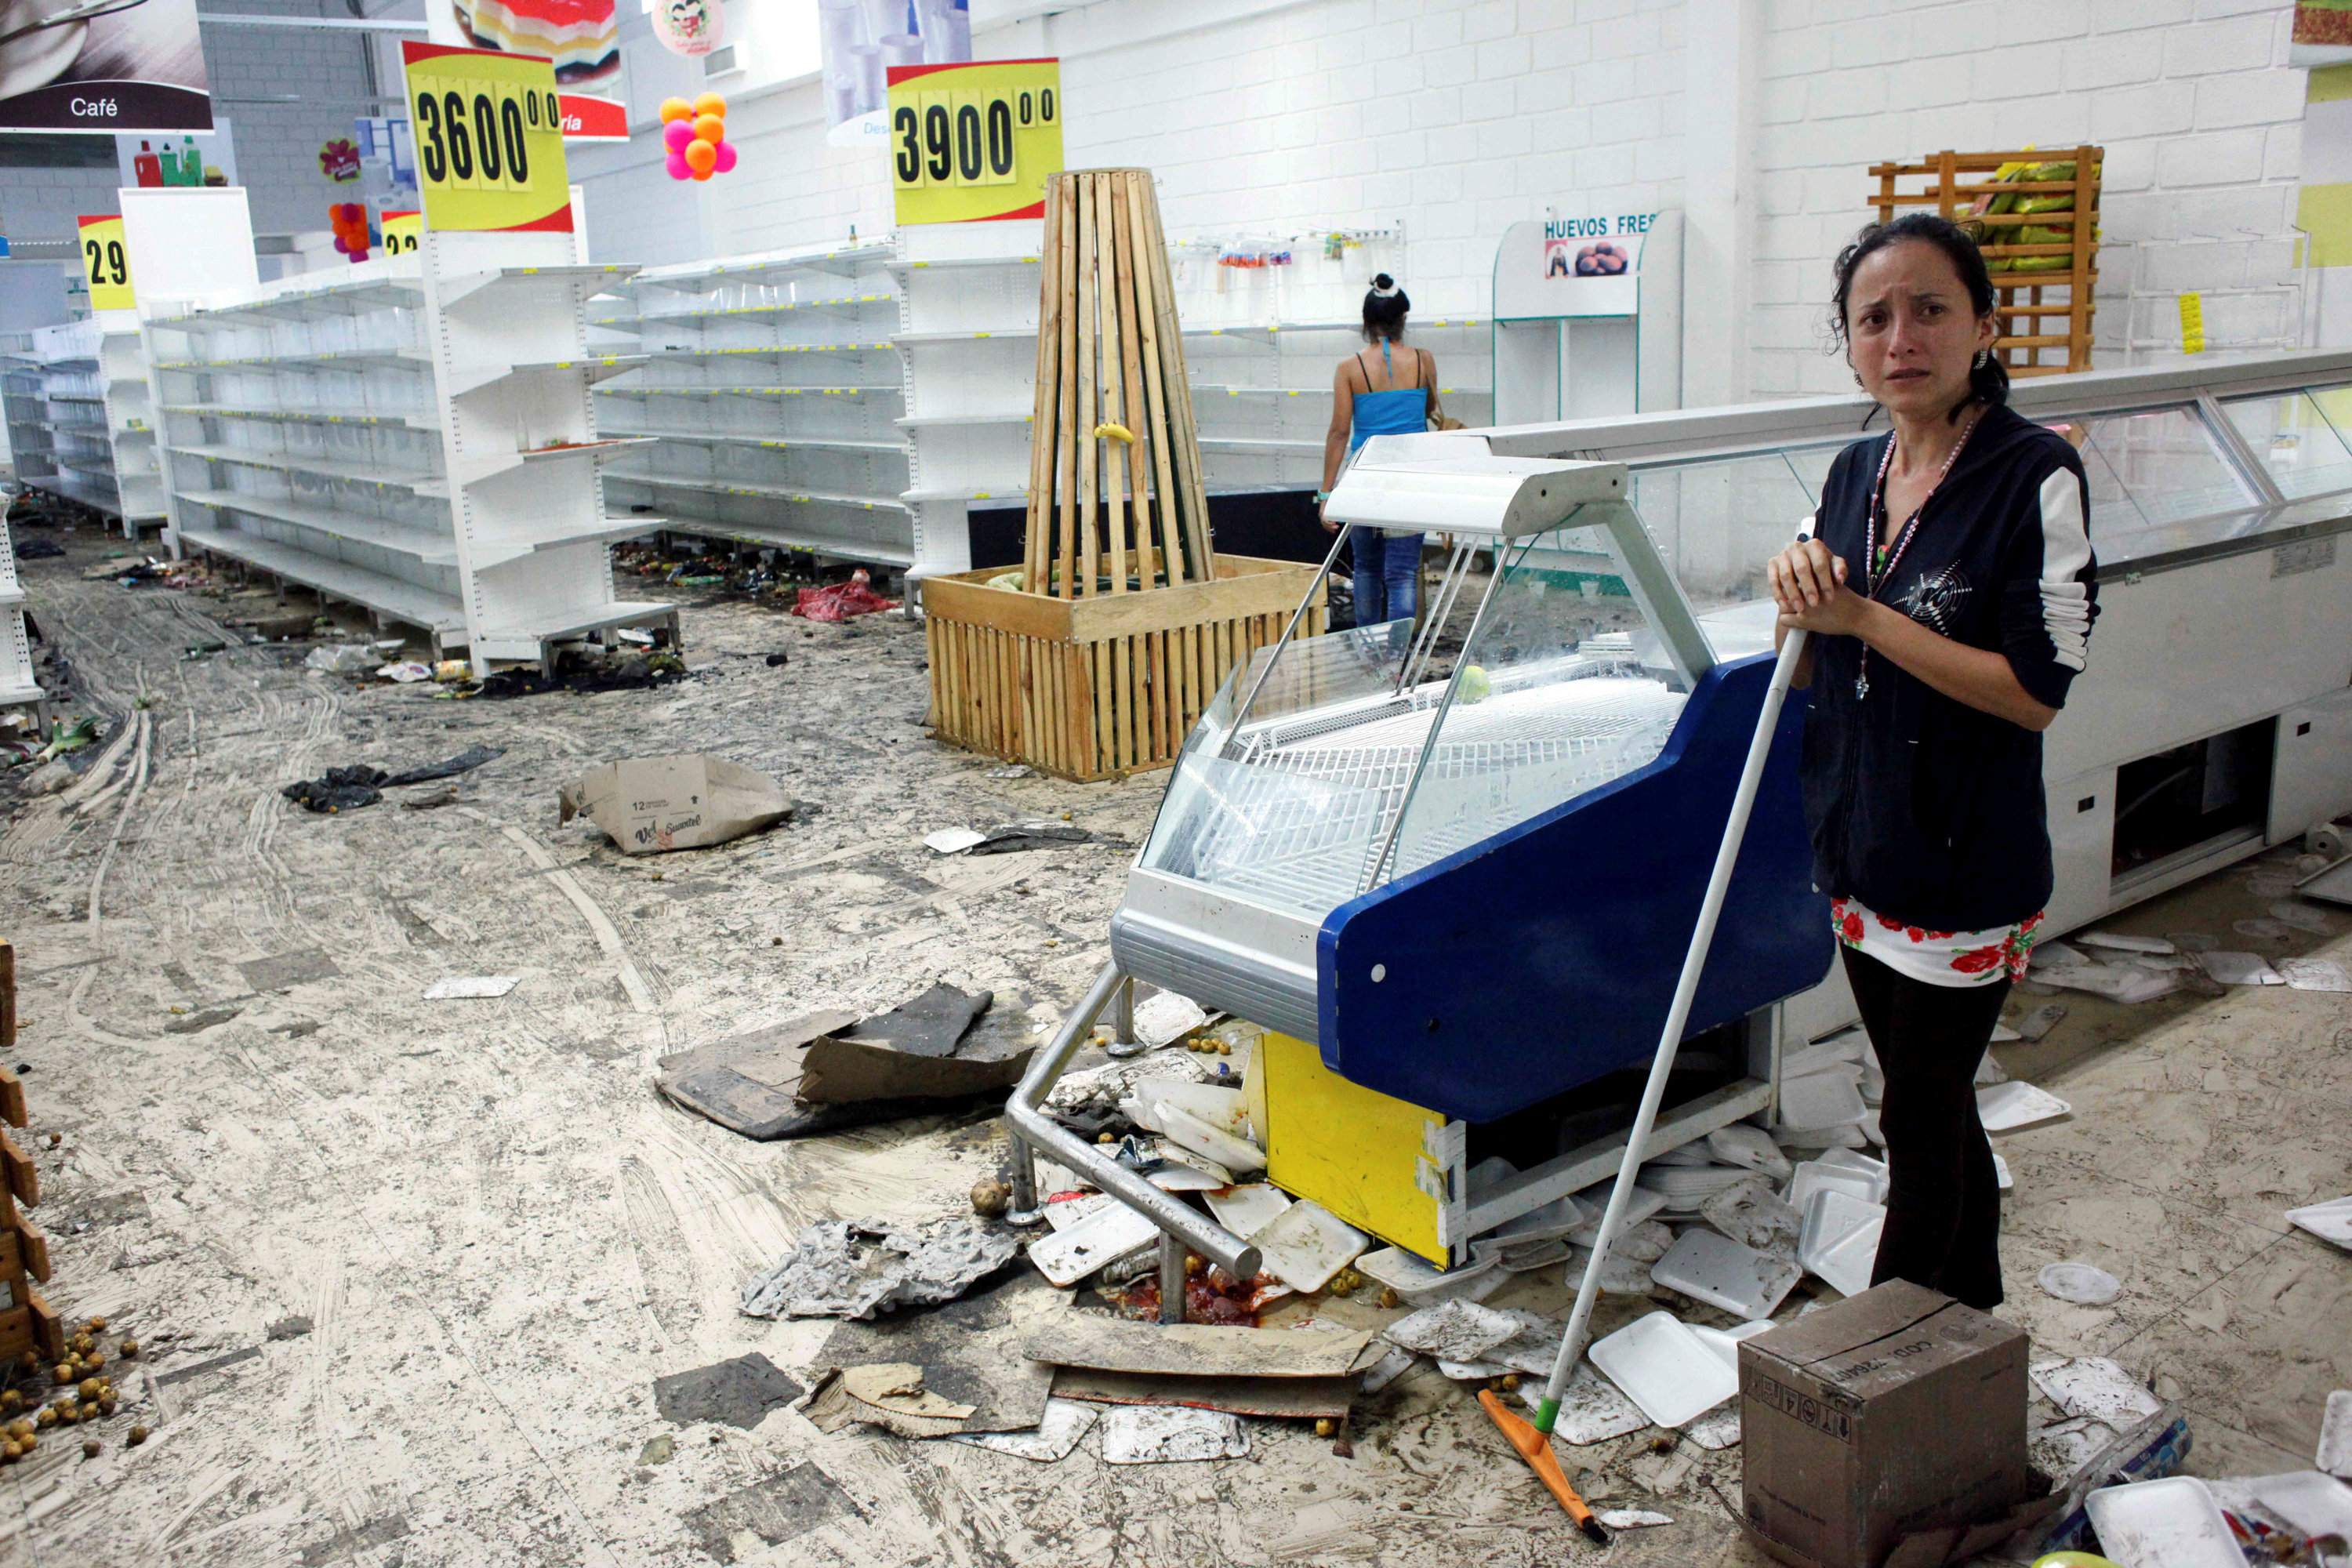 A supermarket was one of many stores looted in San Cristobal, Venezuela. Photo: Reuters